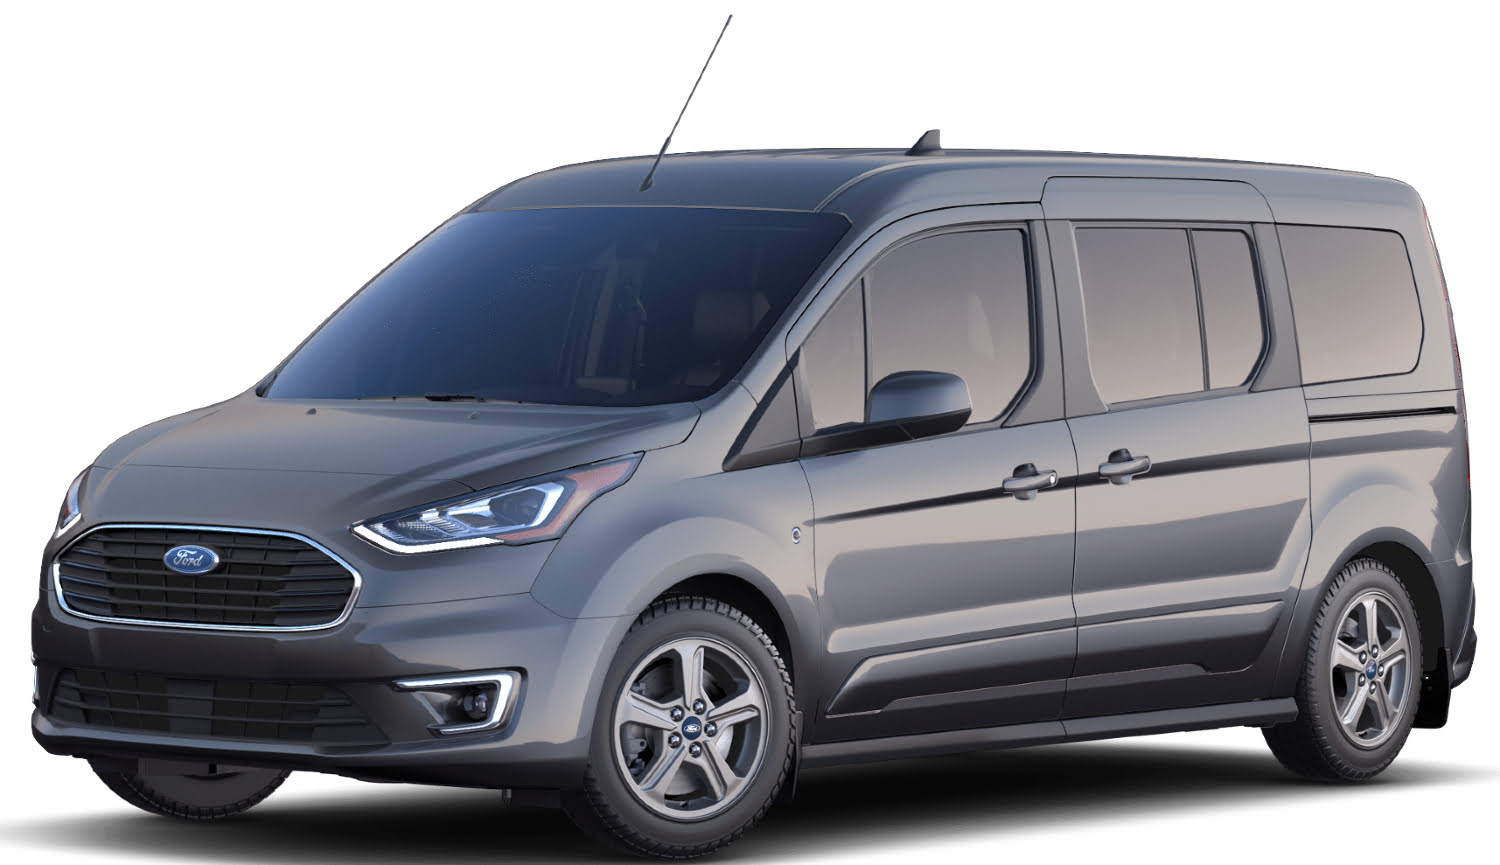 2021 Ford Transit Connect Gains New Solar Silver Color: First Look